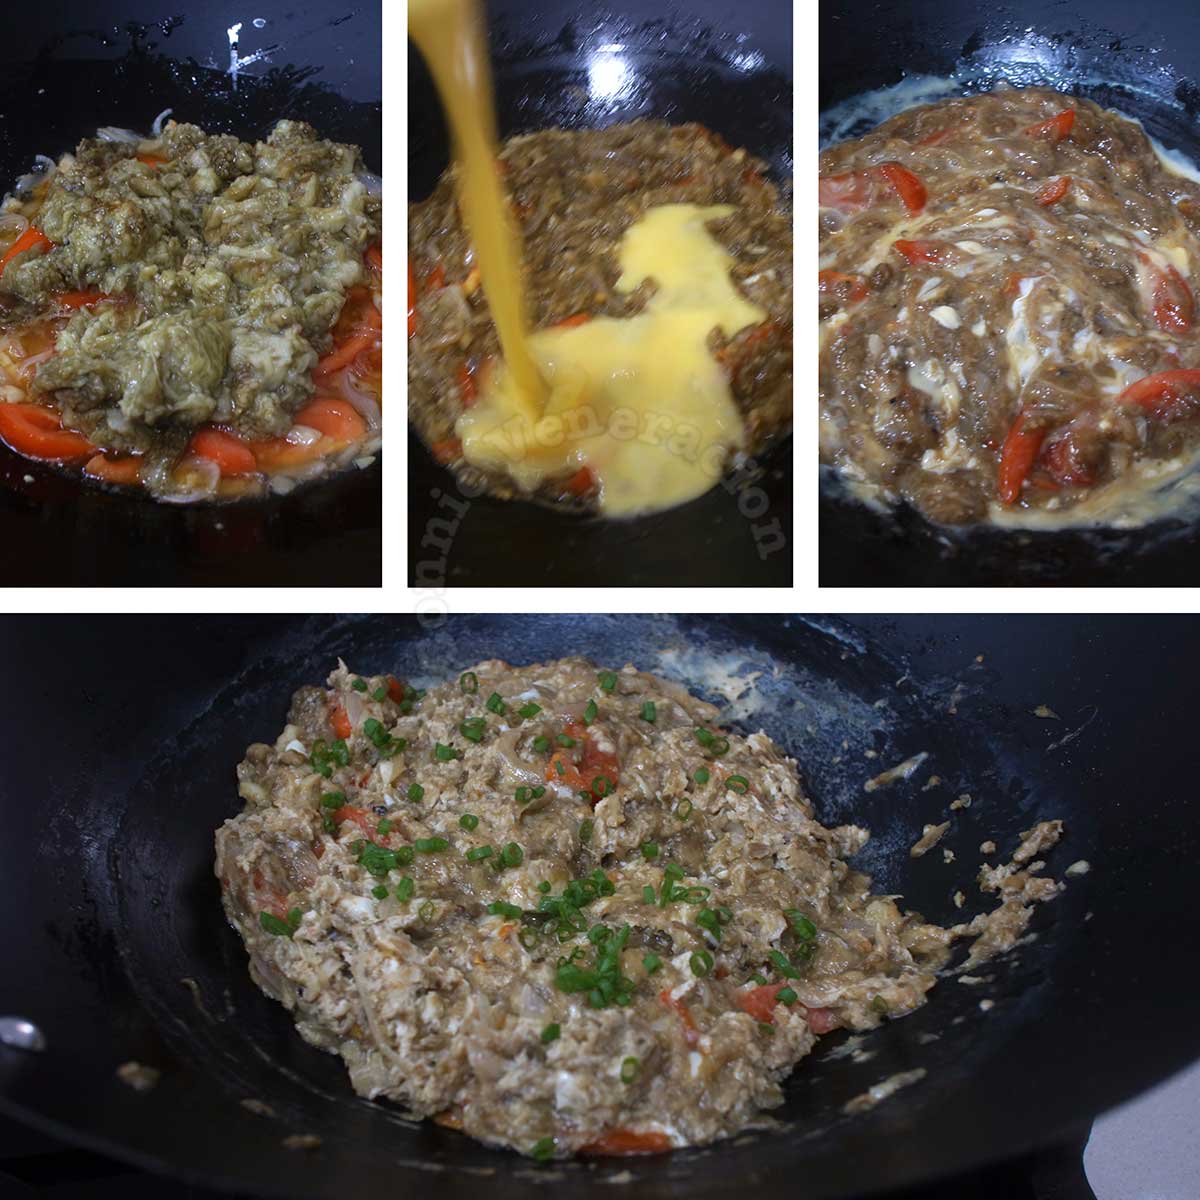 Adding cooked eggplant and eggs to sauteed shallots, garlic and tomatoes